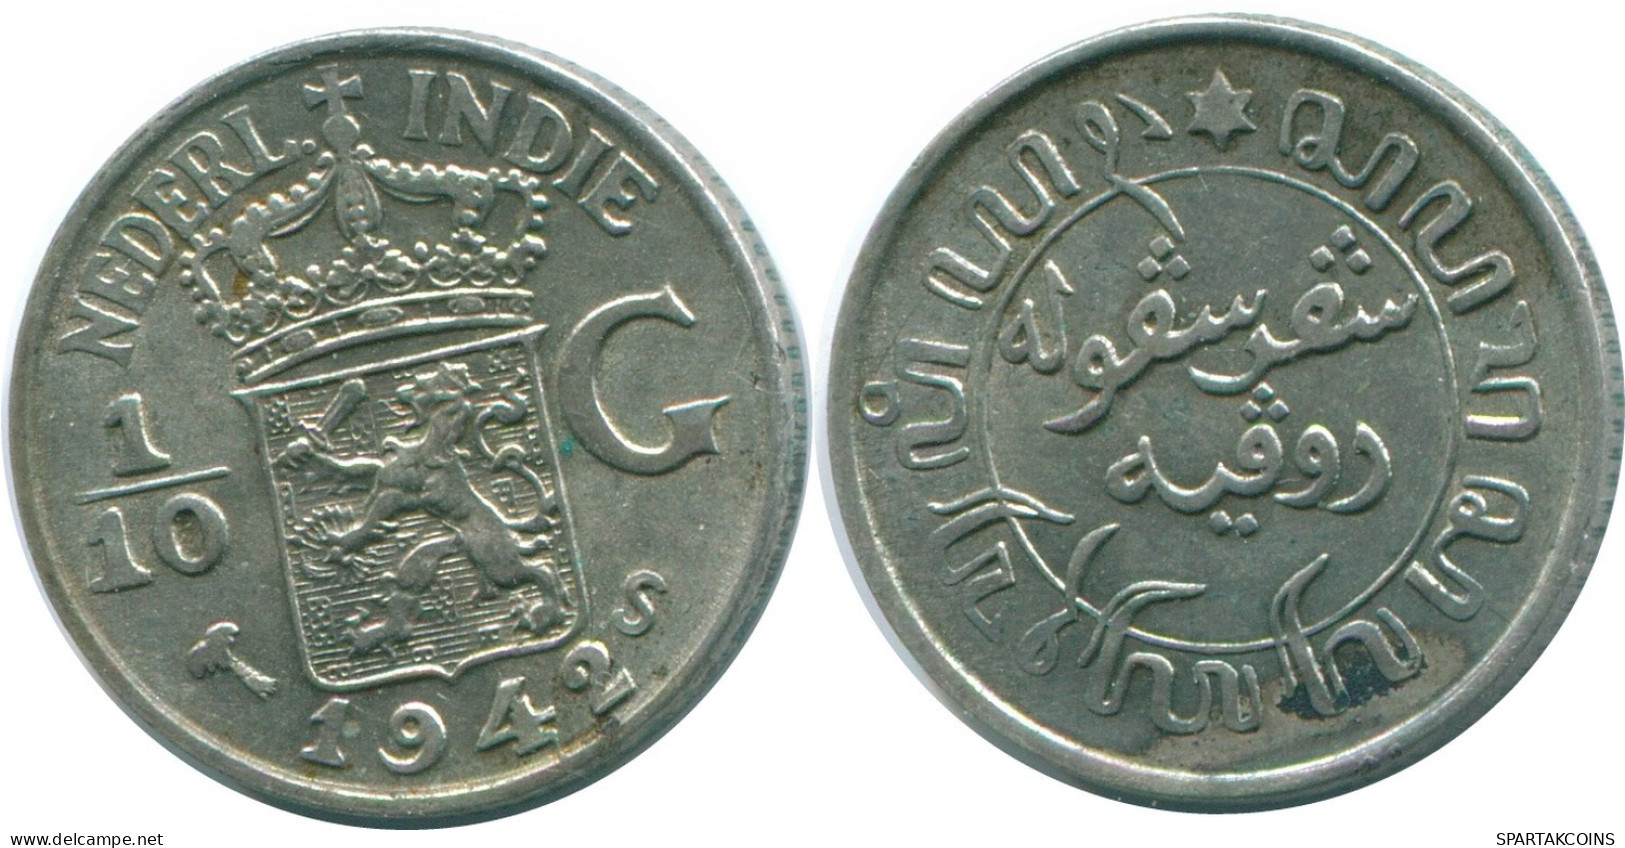 1/10 GULDEN 1942 NETHERLANDS EAST INDIES SILVER Colonial Coin #NL13919.3.U.A - Indes Neerlandesas